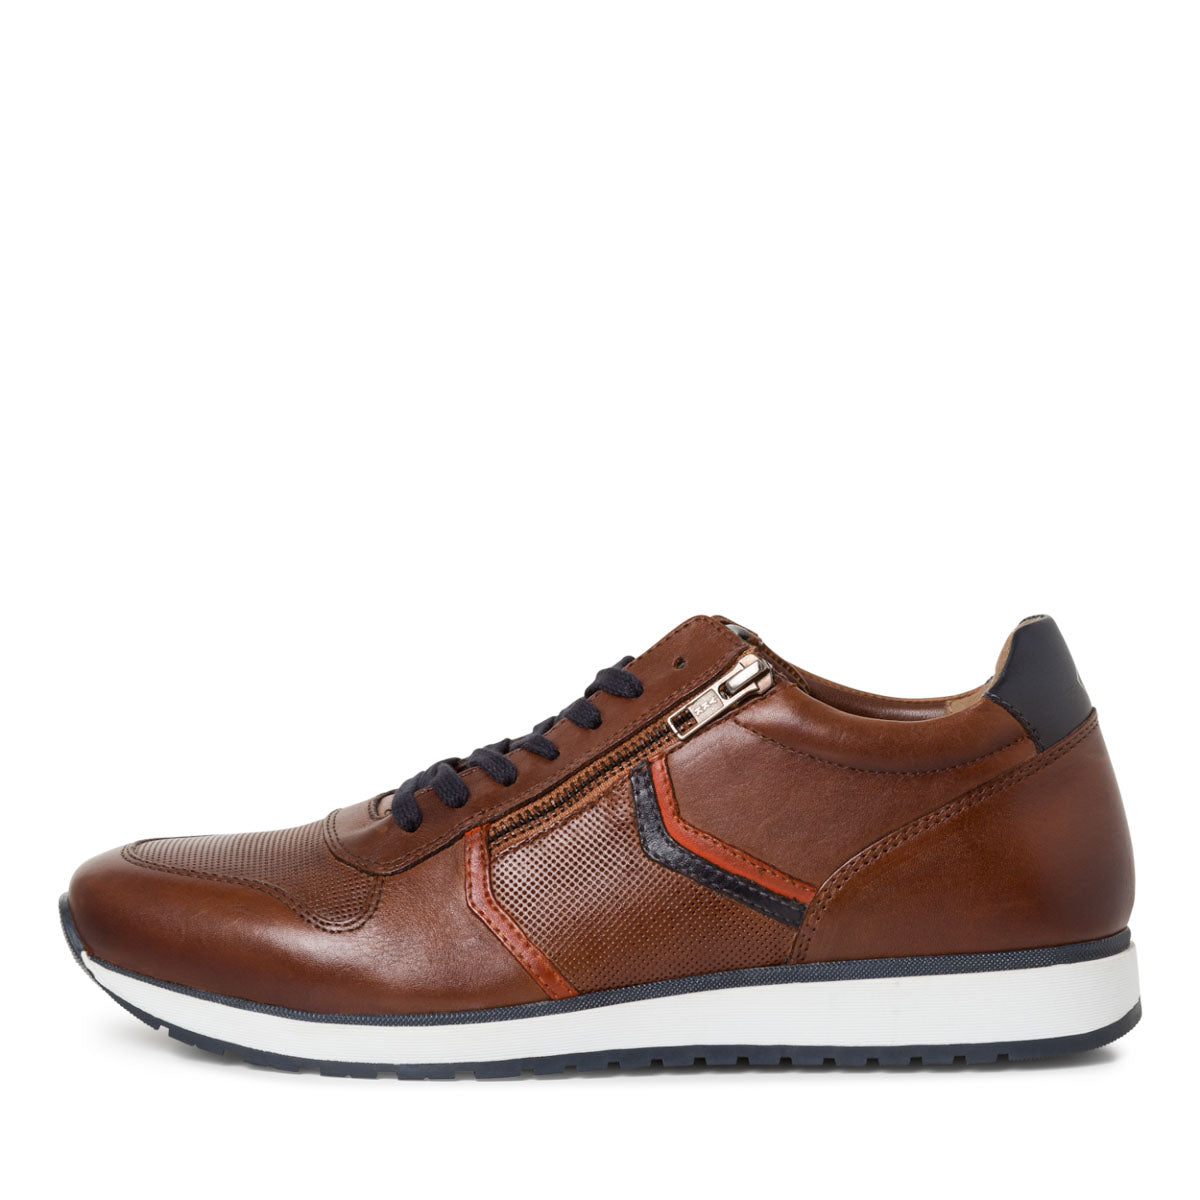 Marco Tozzi Tan Leather Runner Shoes with Zipper